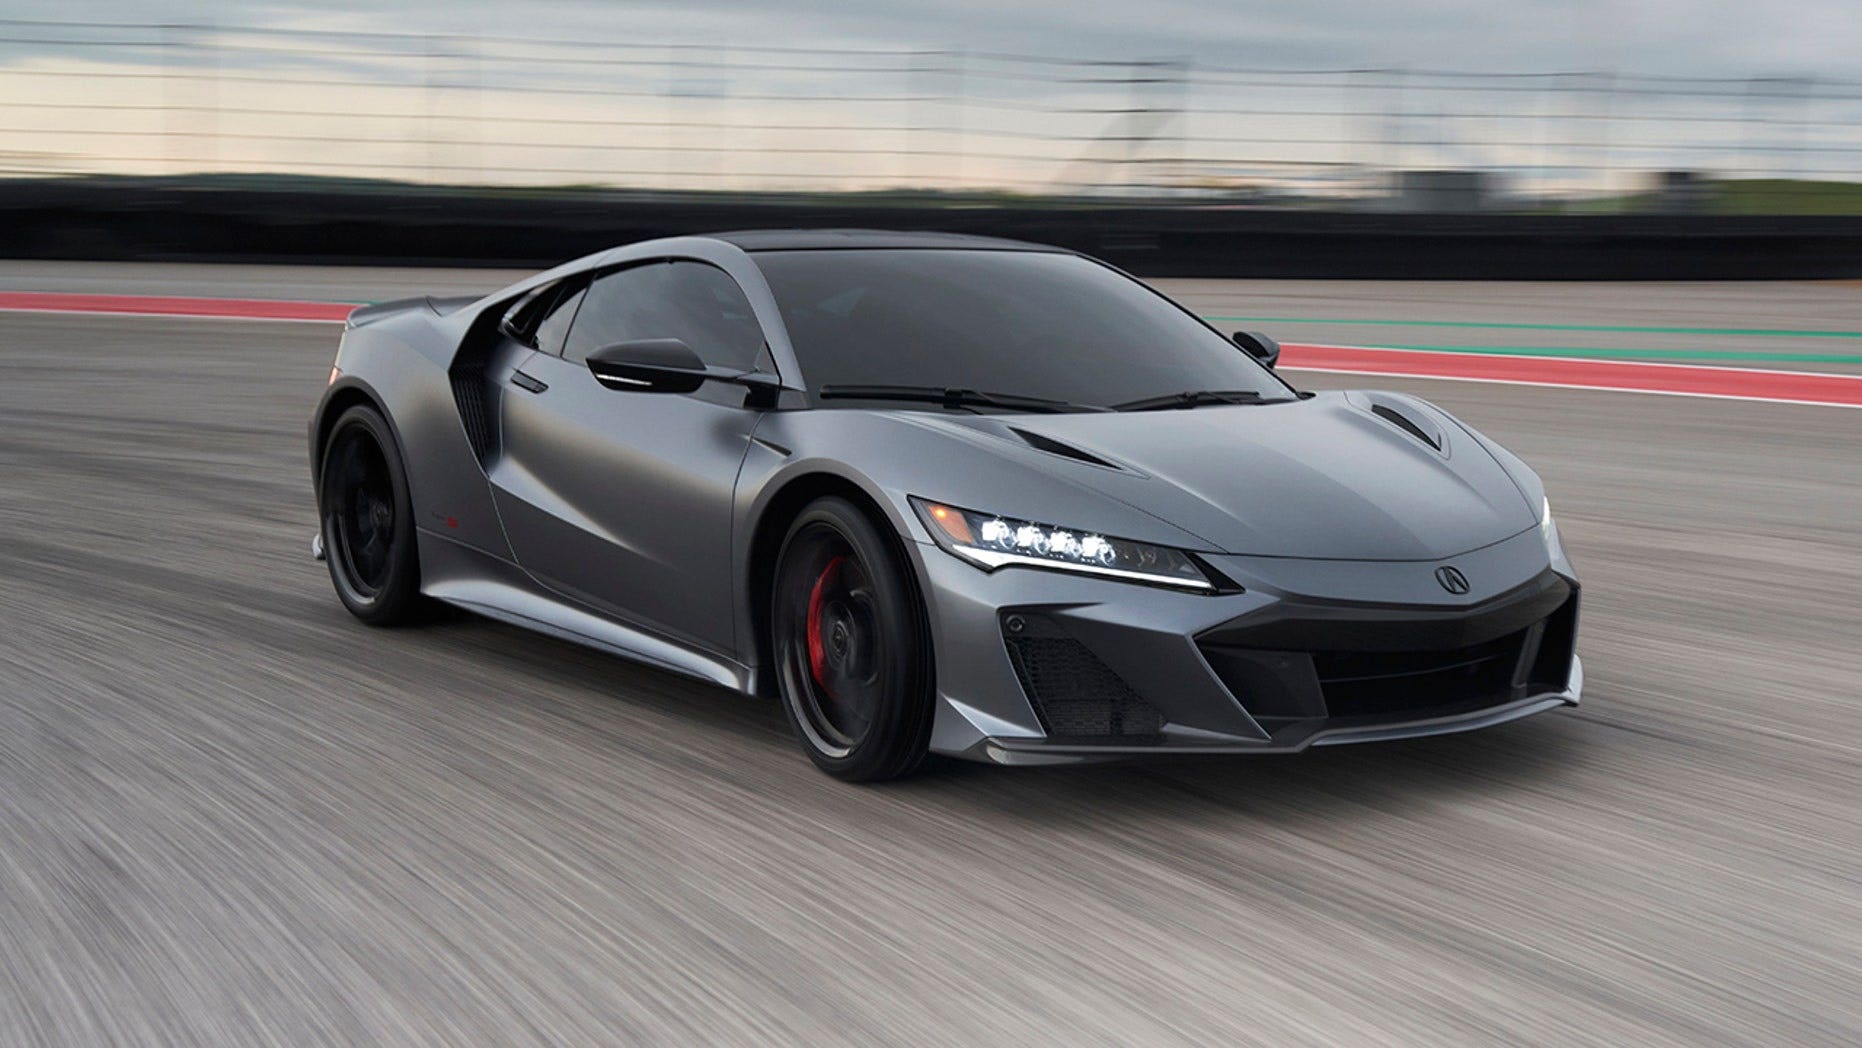 American-made $171K Acura NSX Type S supercar sold out for 2022